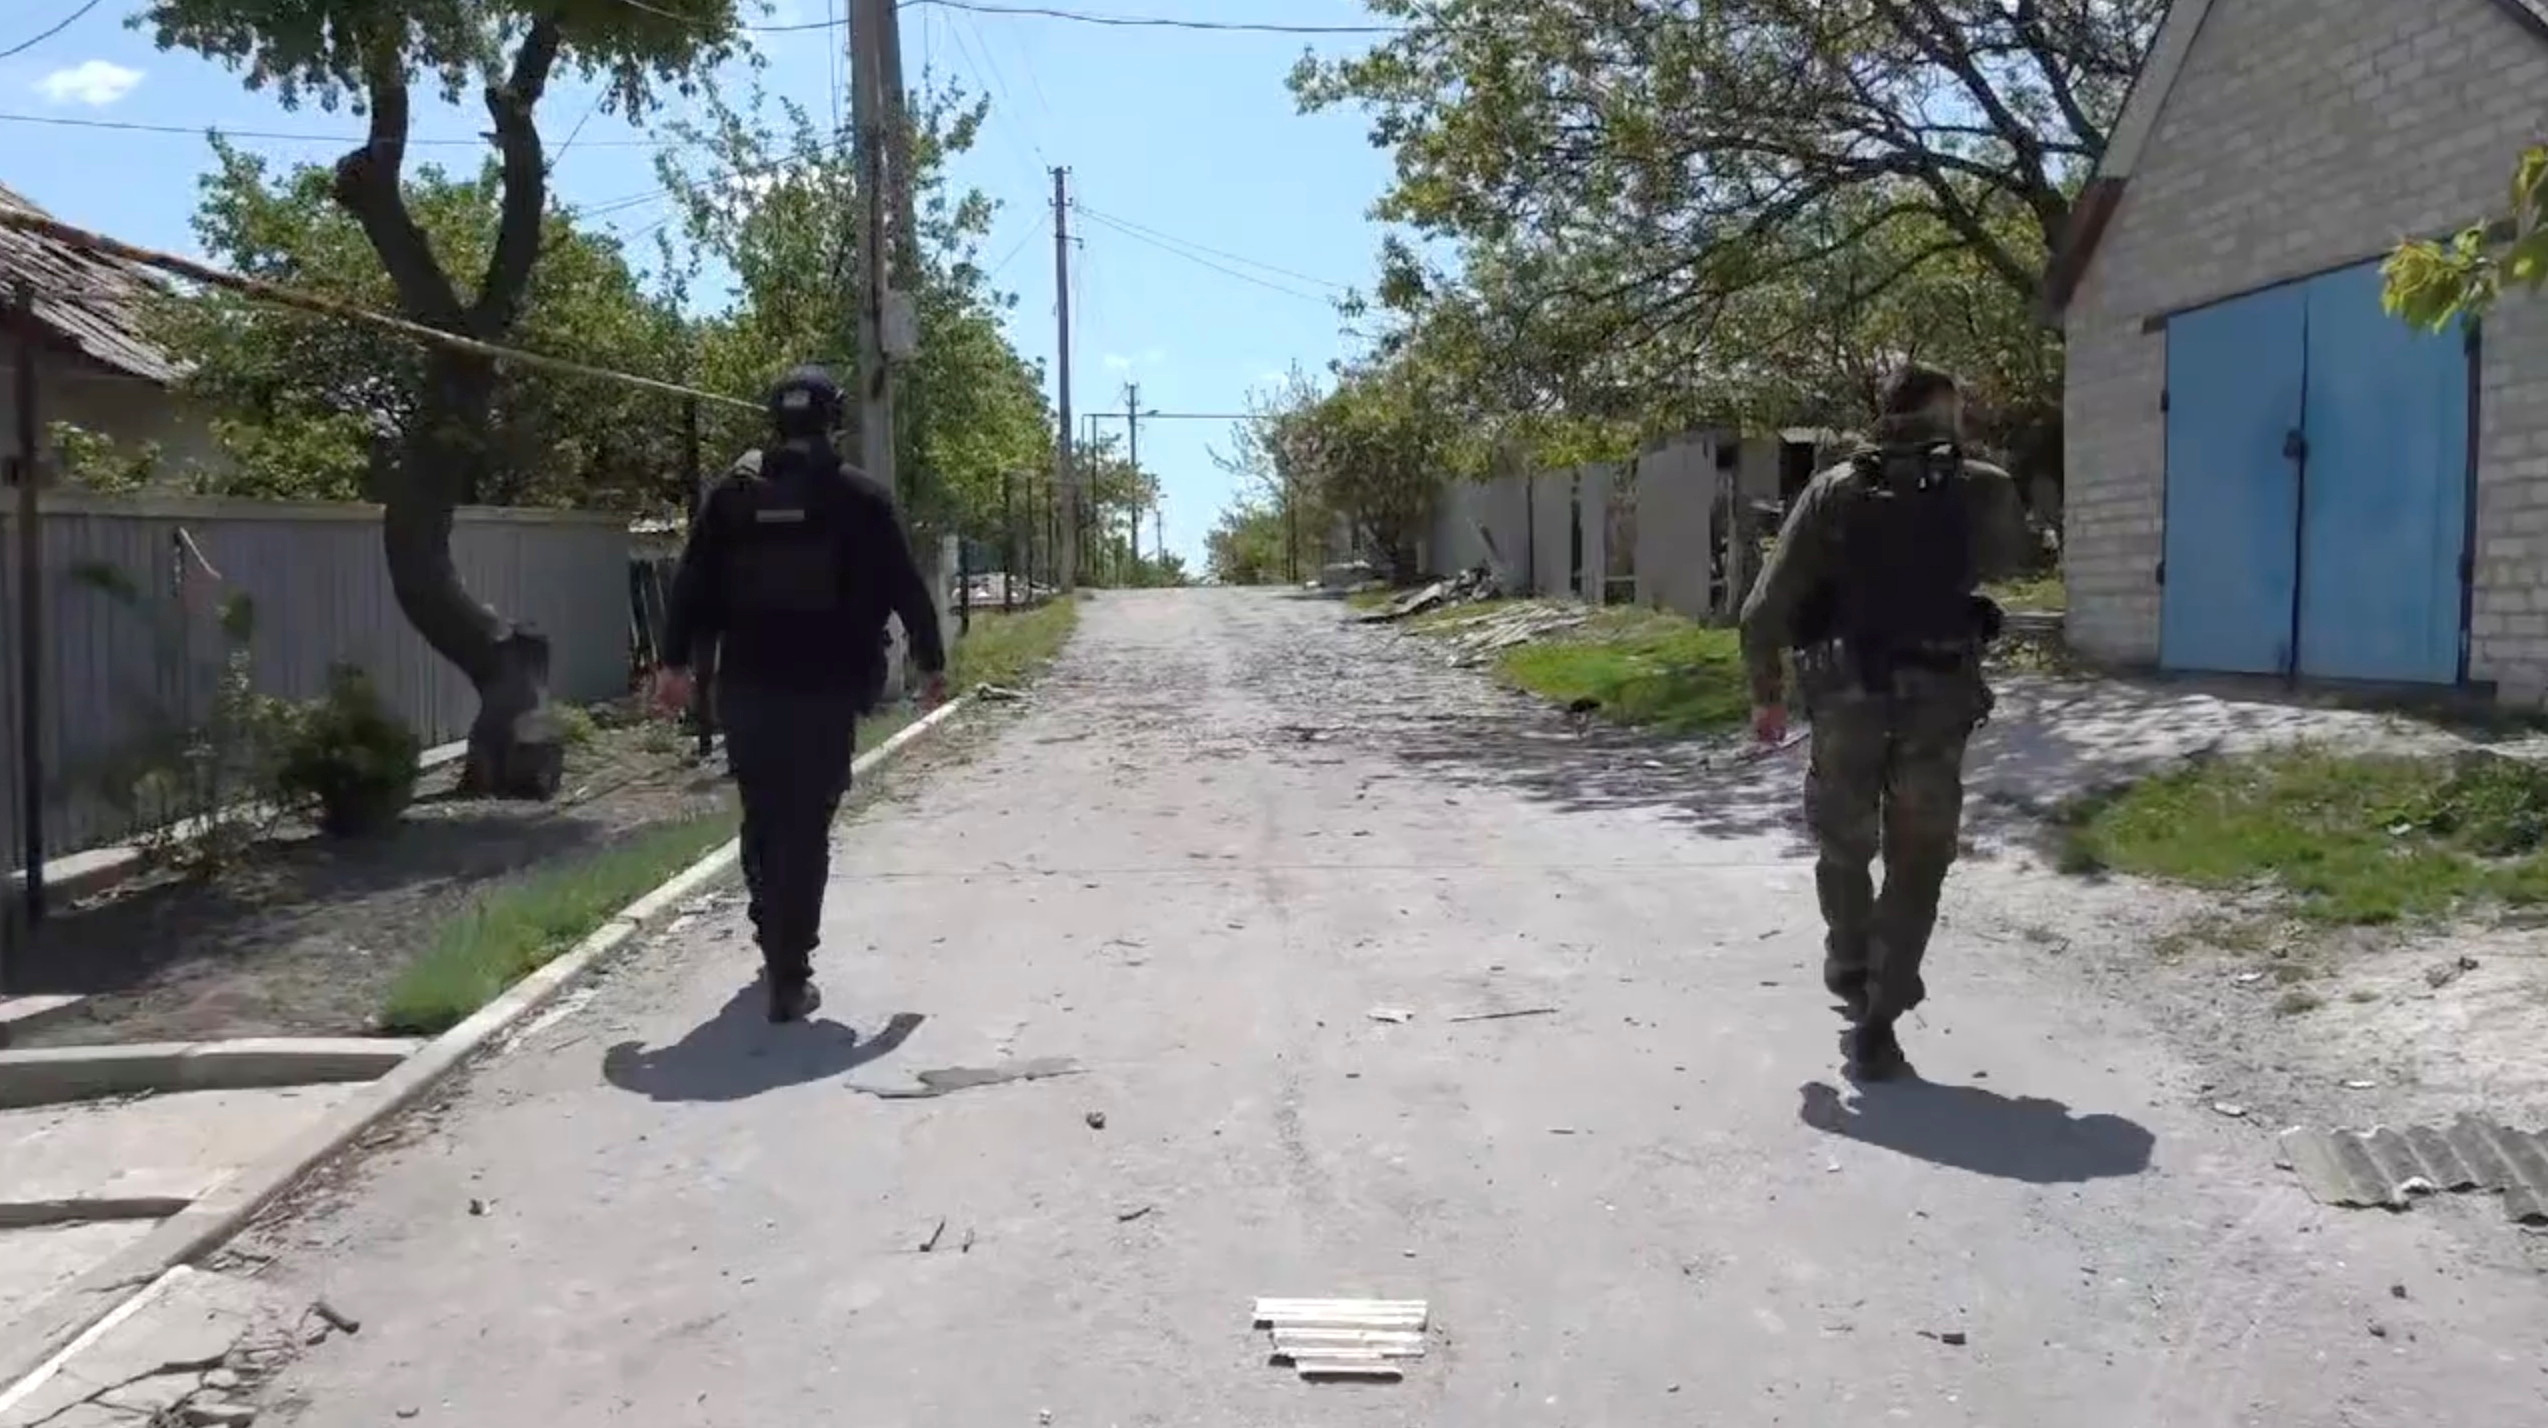 Members of the security forces walk on a street as they evacuate civilians, in Bilohorivka